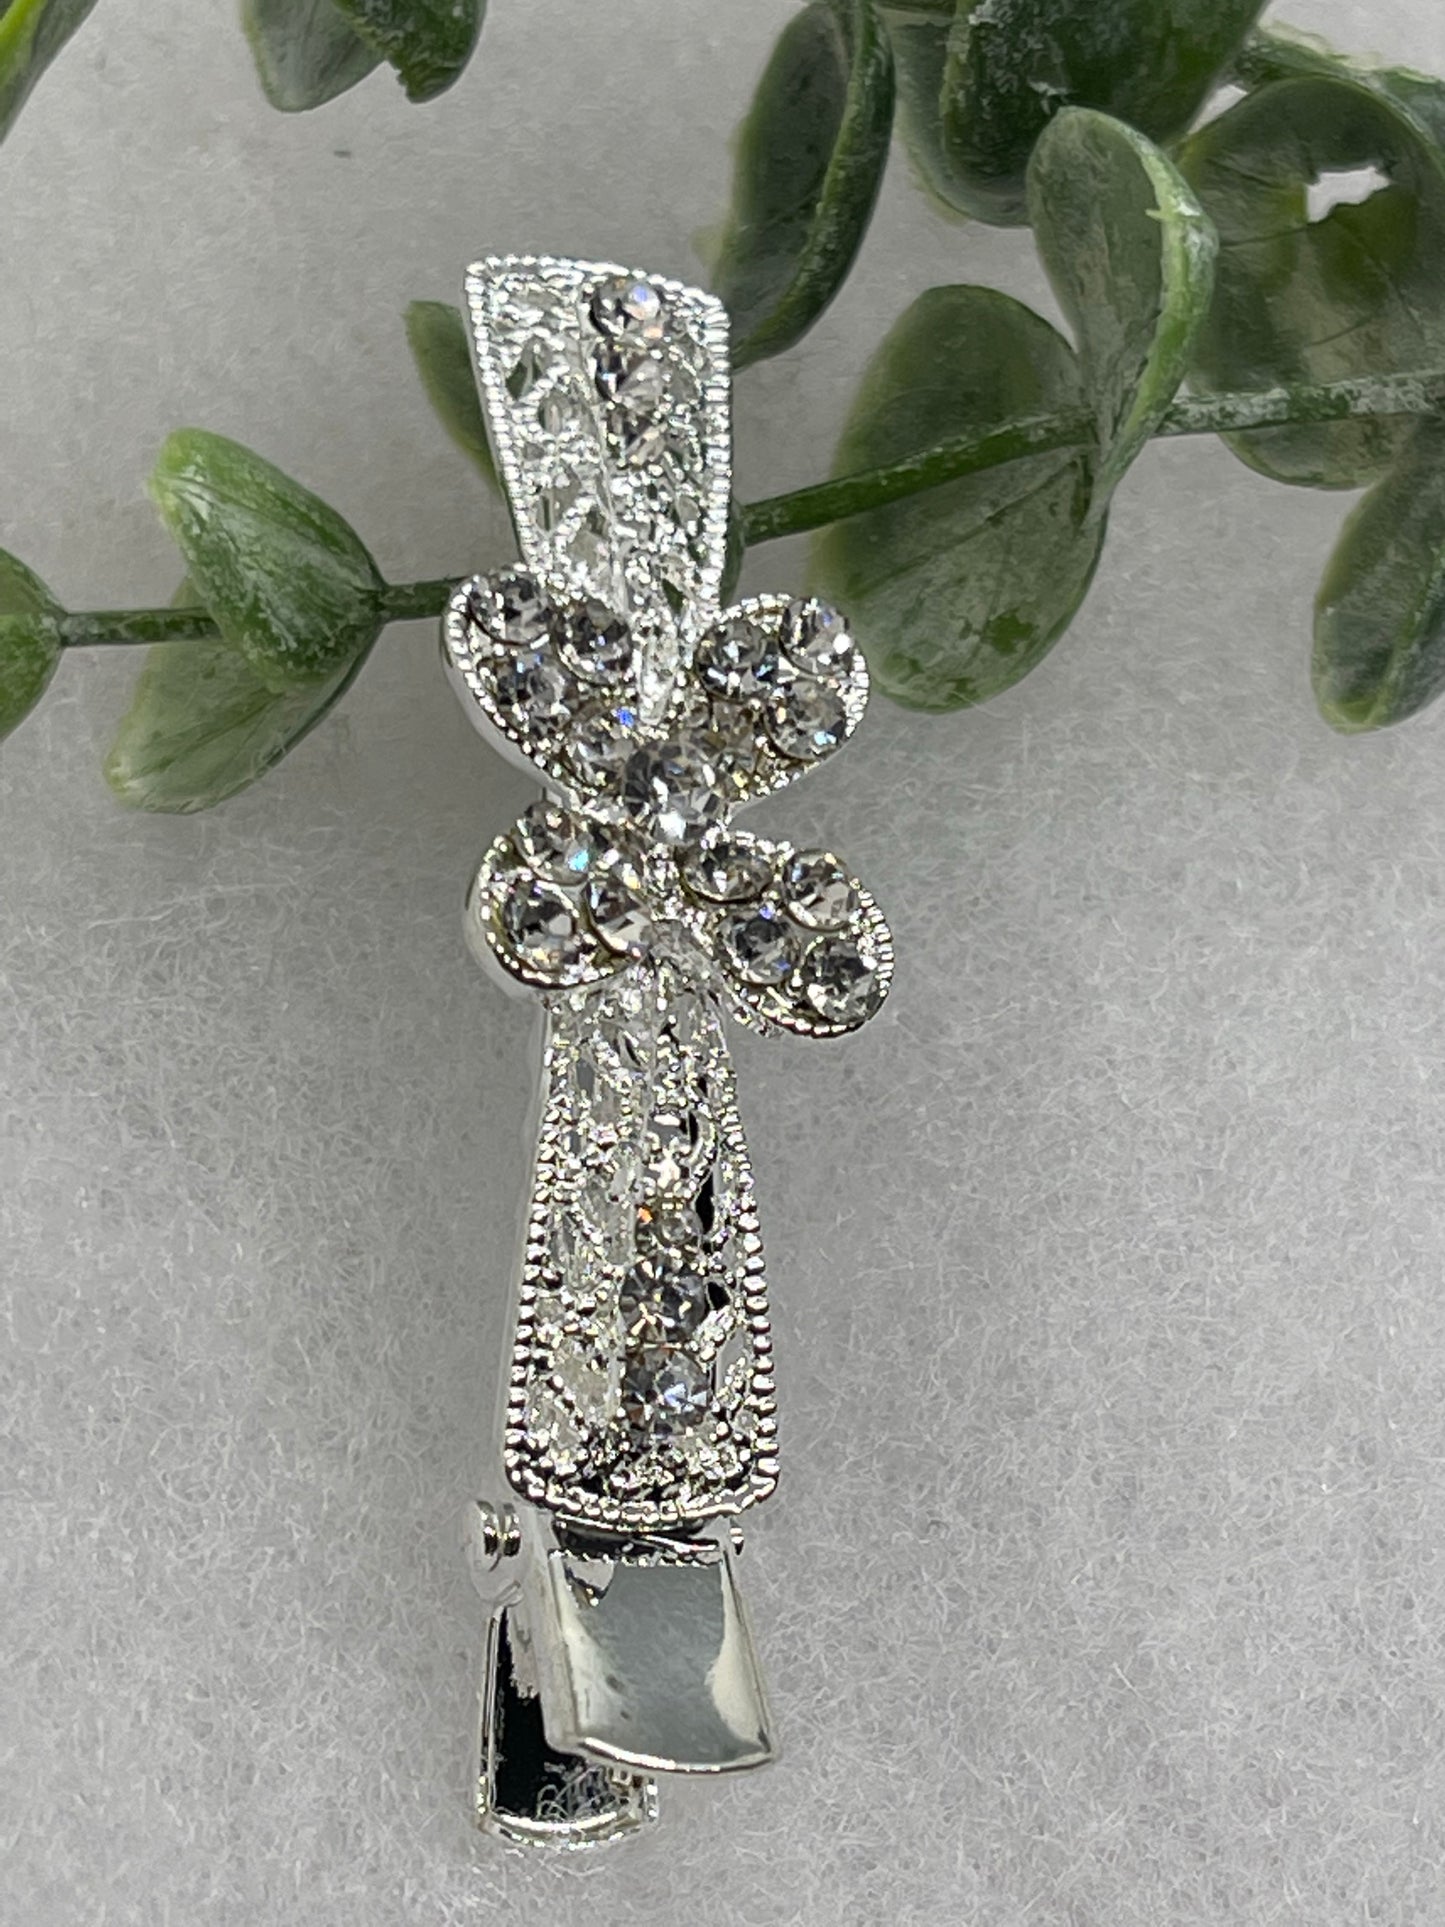 Butterfly Iridescent Crystal rhinestone alligator salon clip silver approximately 3.0” wedding bridal shower engagement formal princess accessory at